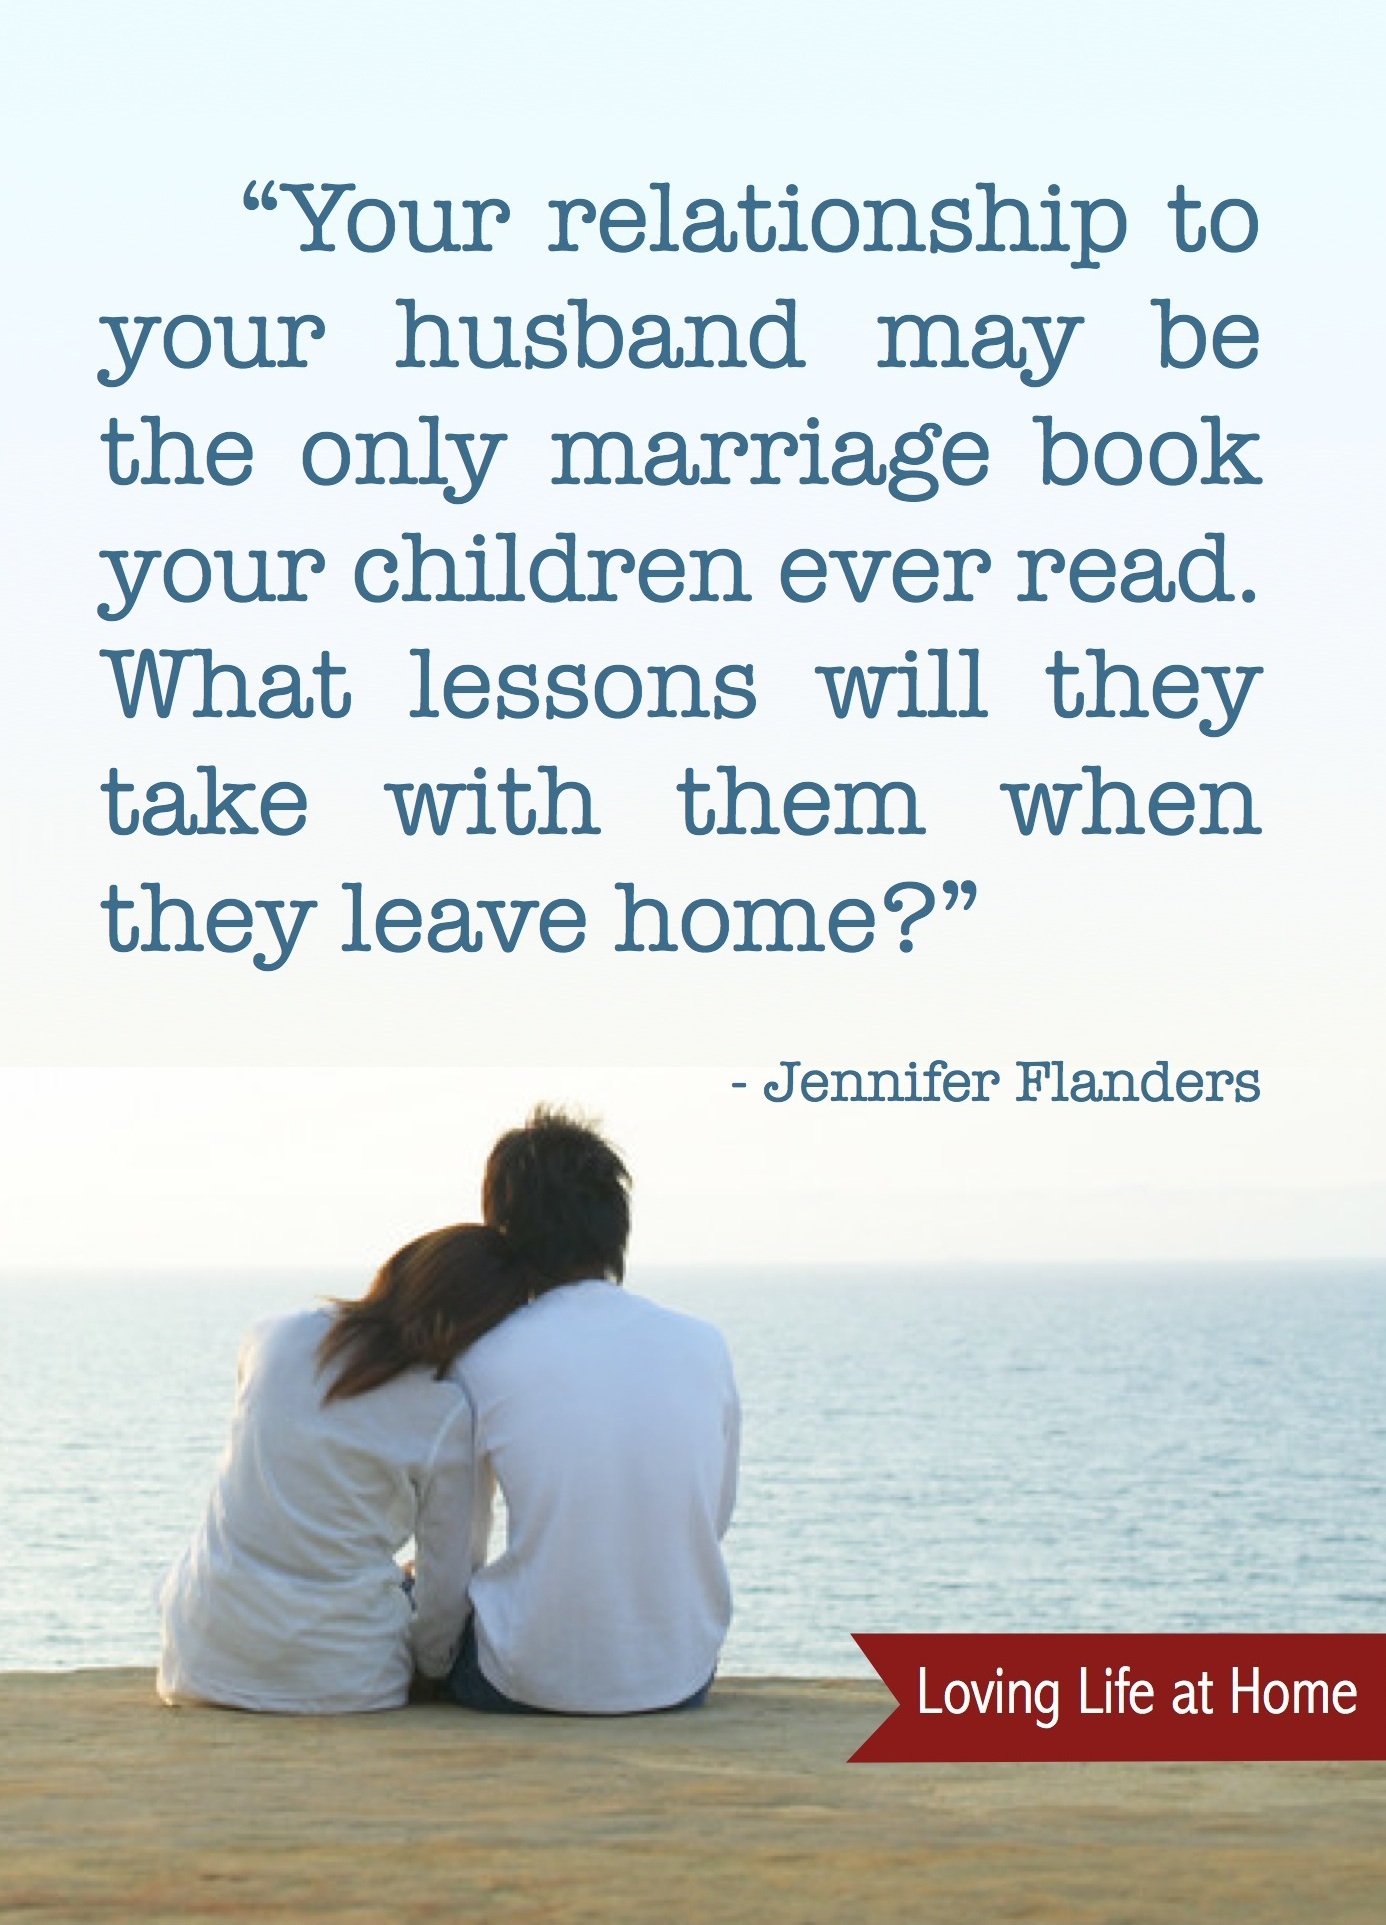 "Your relationship to your husband may be the only marriage book your children ever read. What lessons will they take with them when they leave home?" - Jennifer Flanders